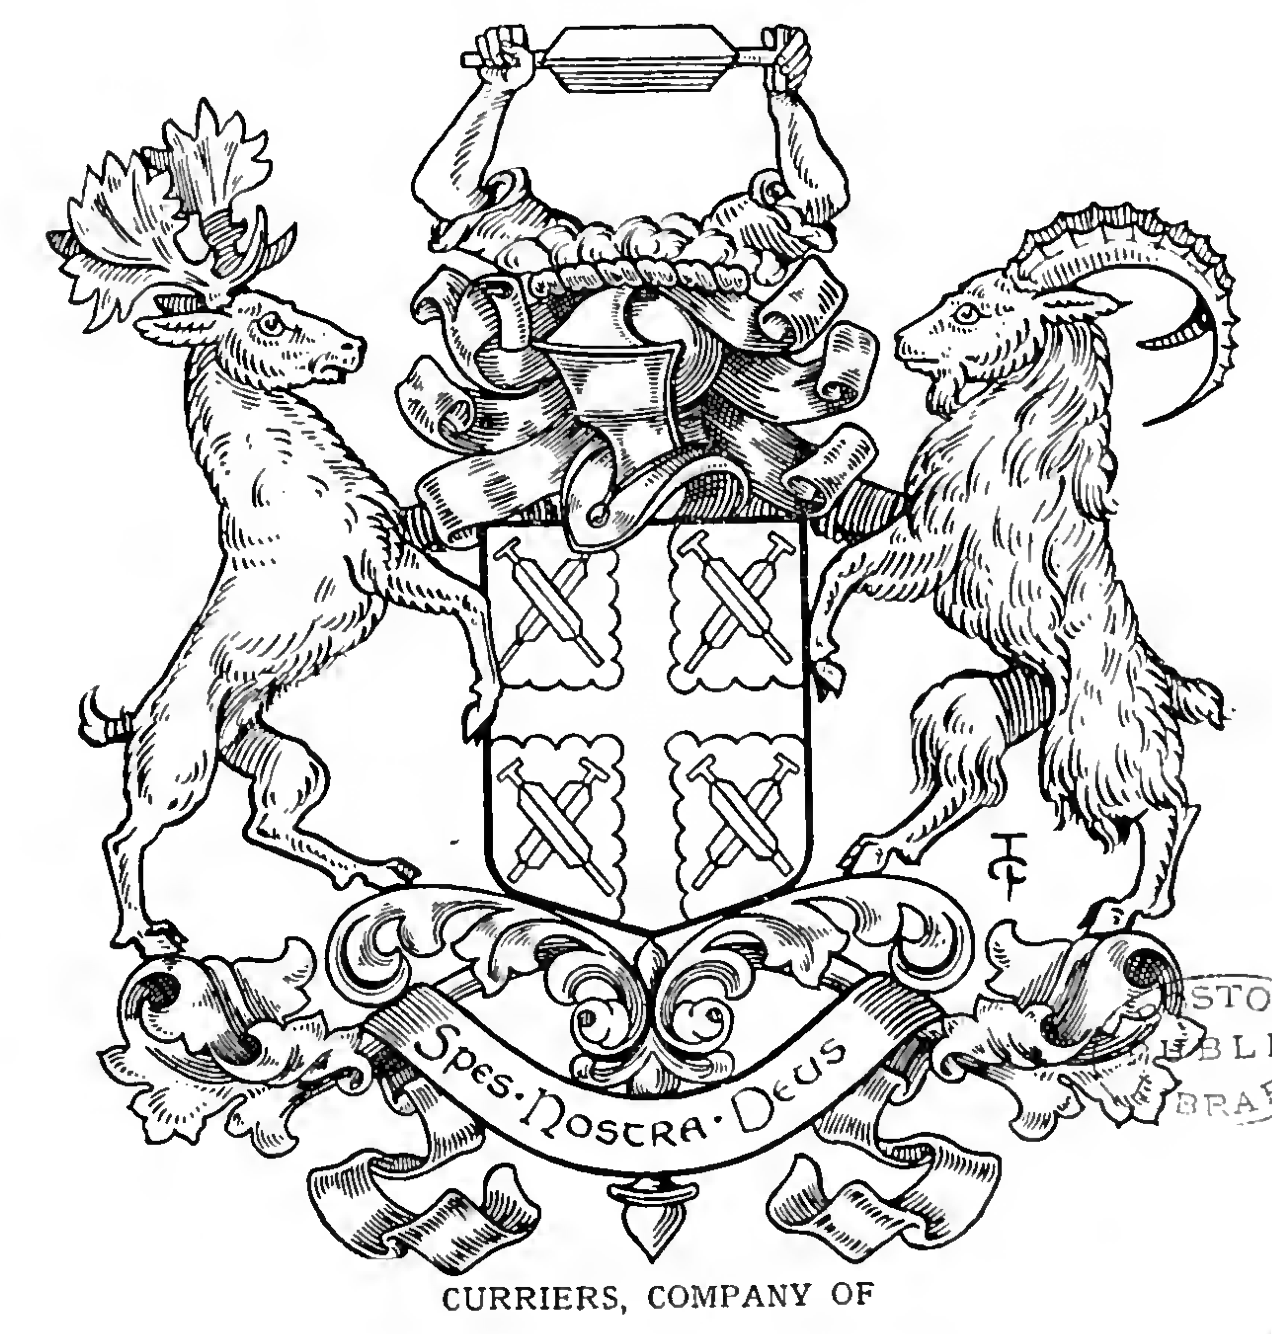 CURRIERS, The Worshipful Company of (London). | DrawShield